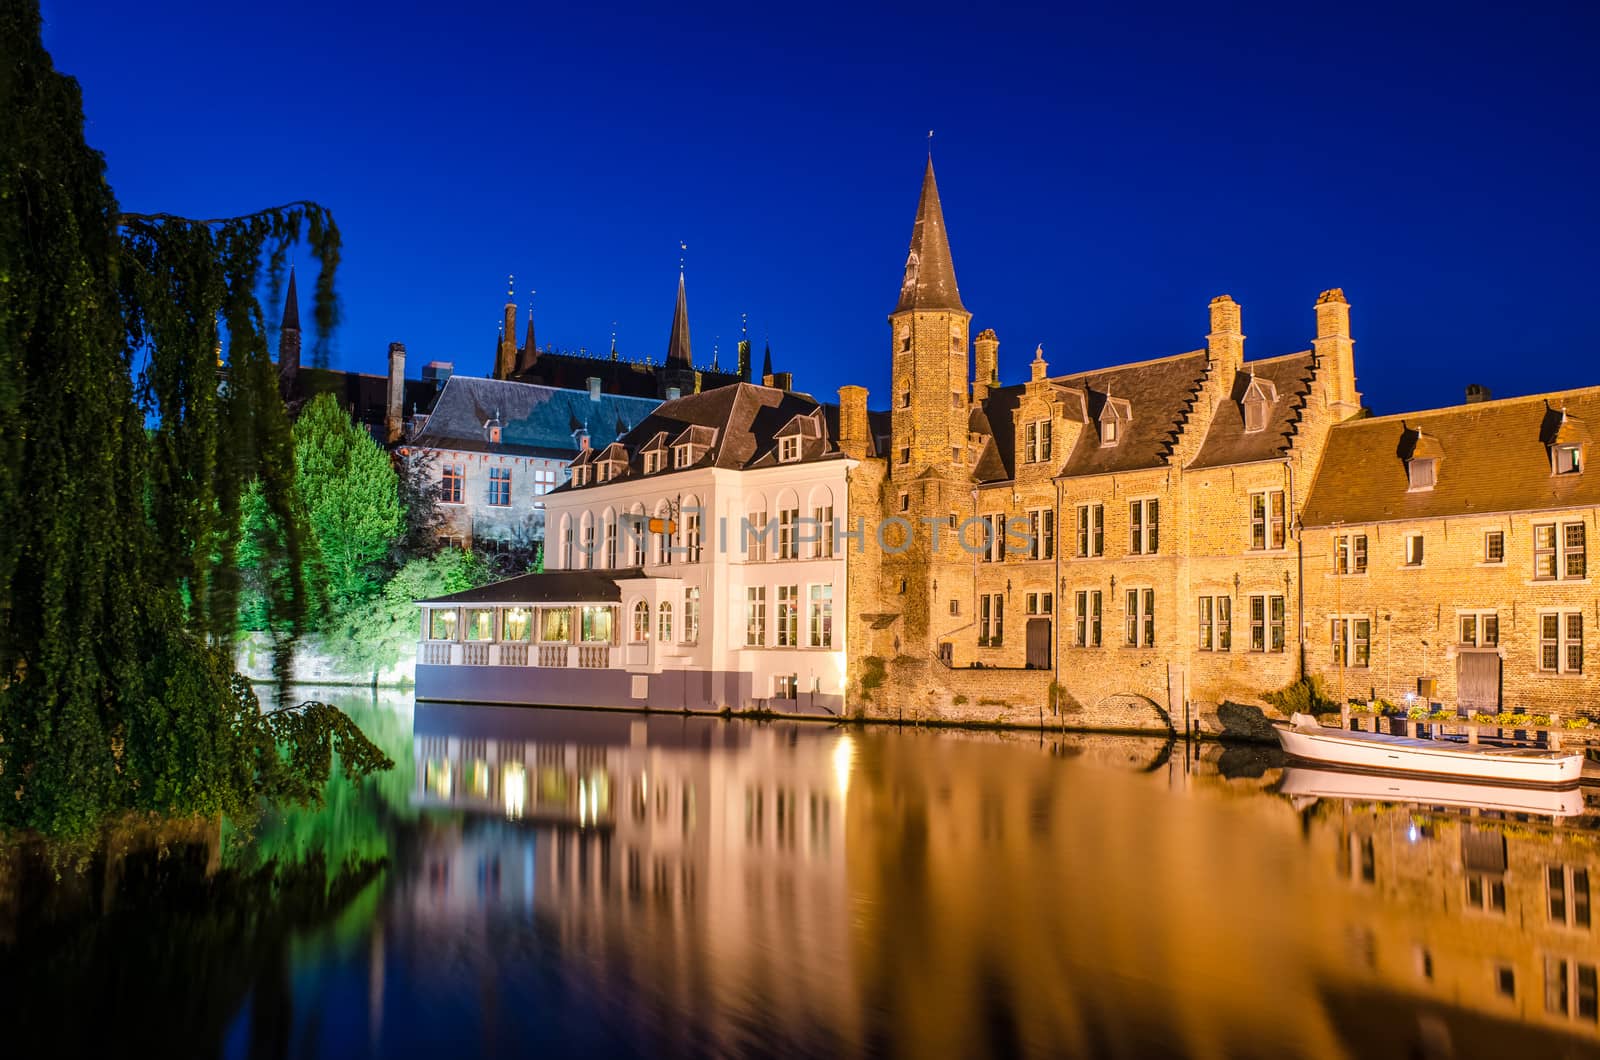 Bruges canal and medieval houses at night with water reflections, Belgium